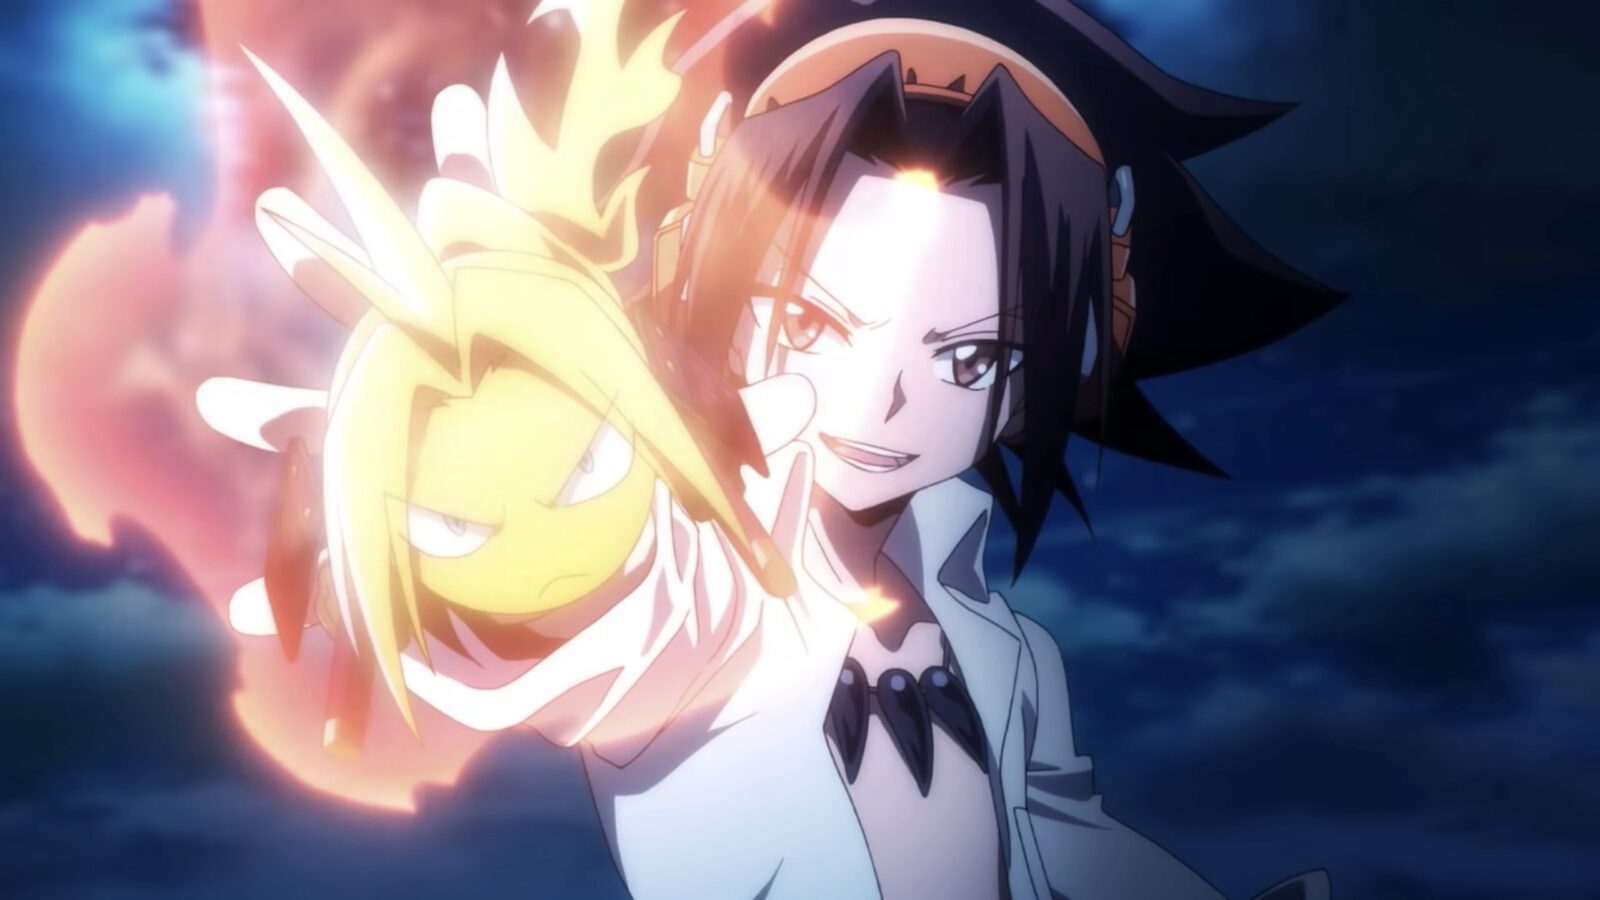 Shaman King Episode 5 – Release Date, Spoilers, and Recap